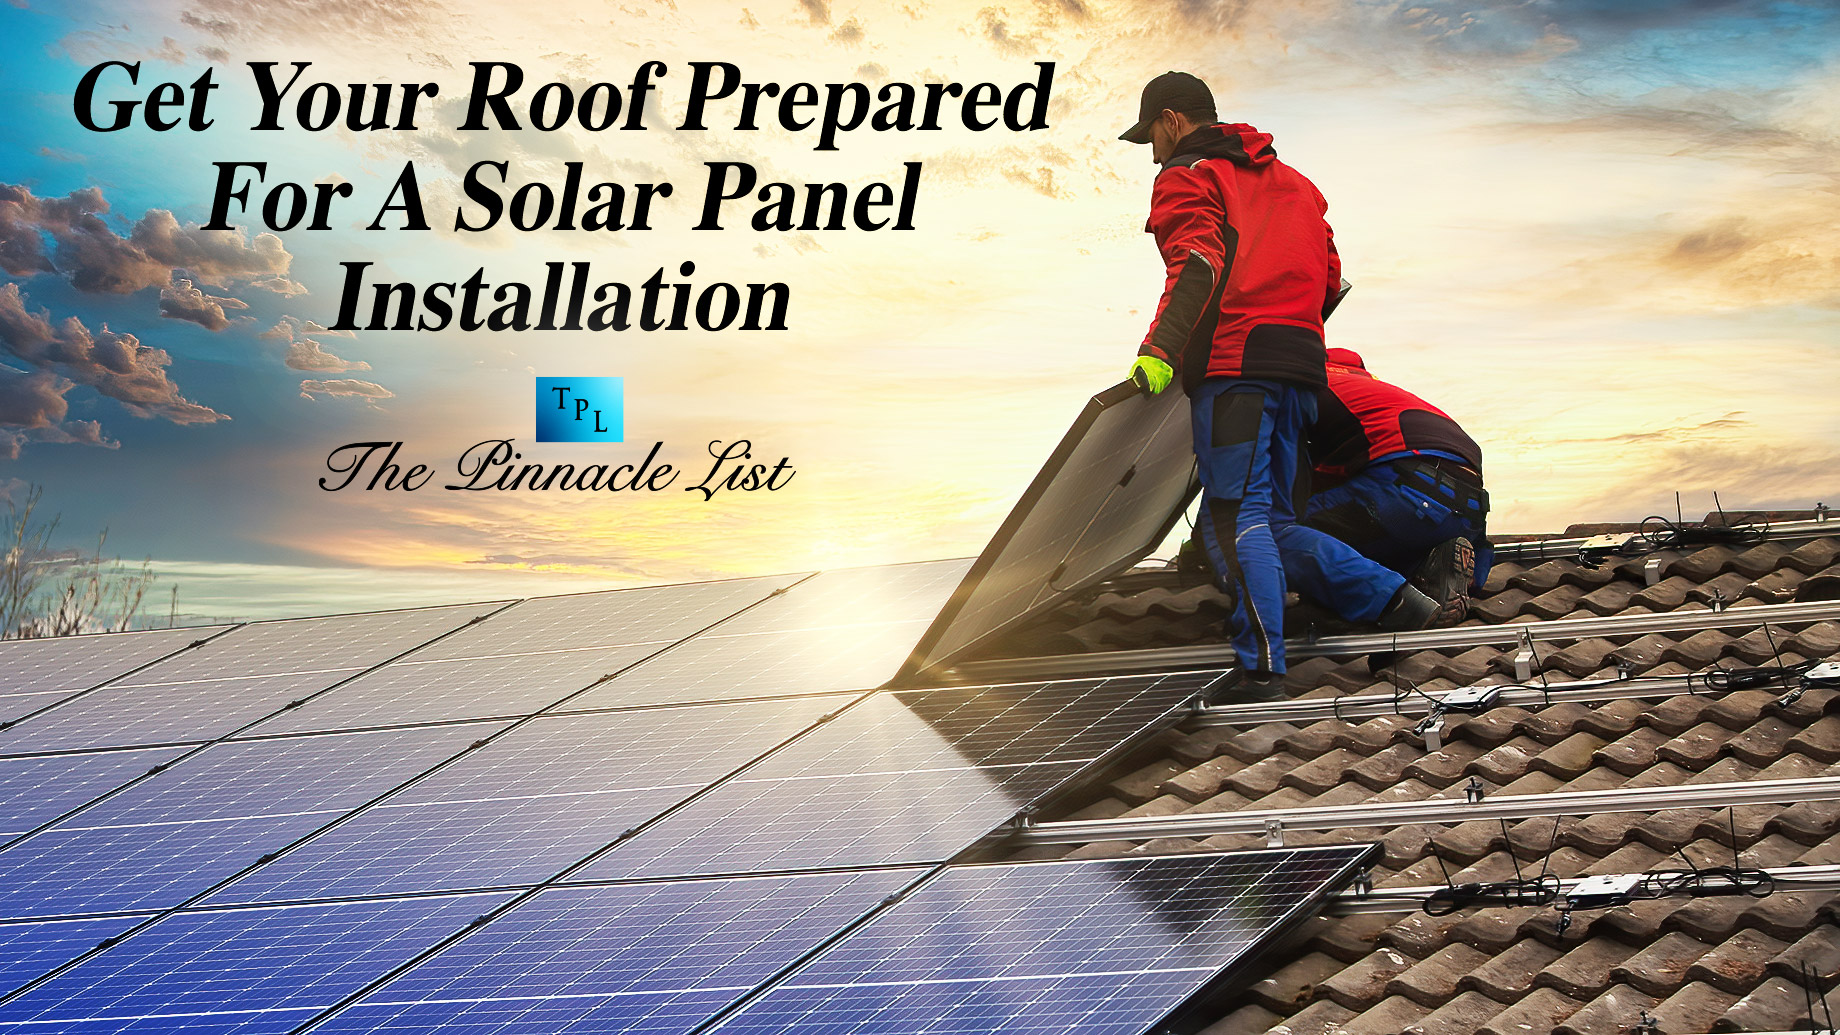 Get Your Roof Prepared For A Solar Panel Installation